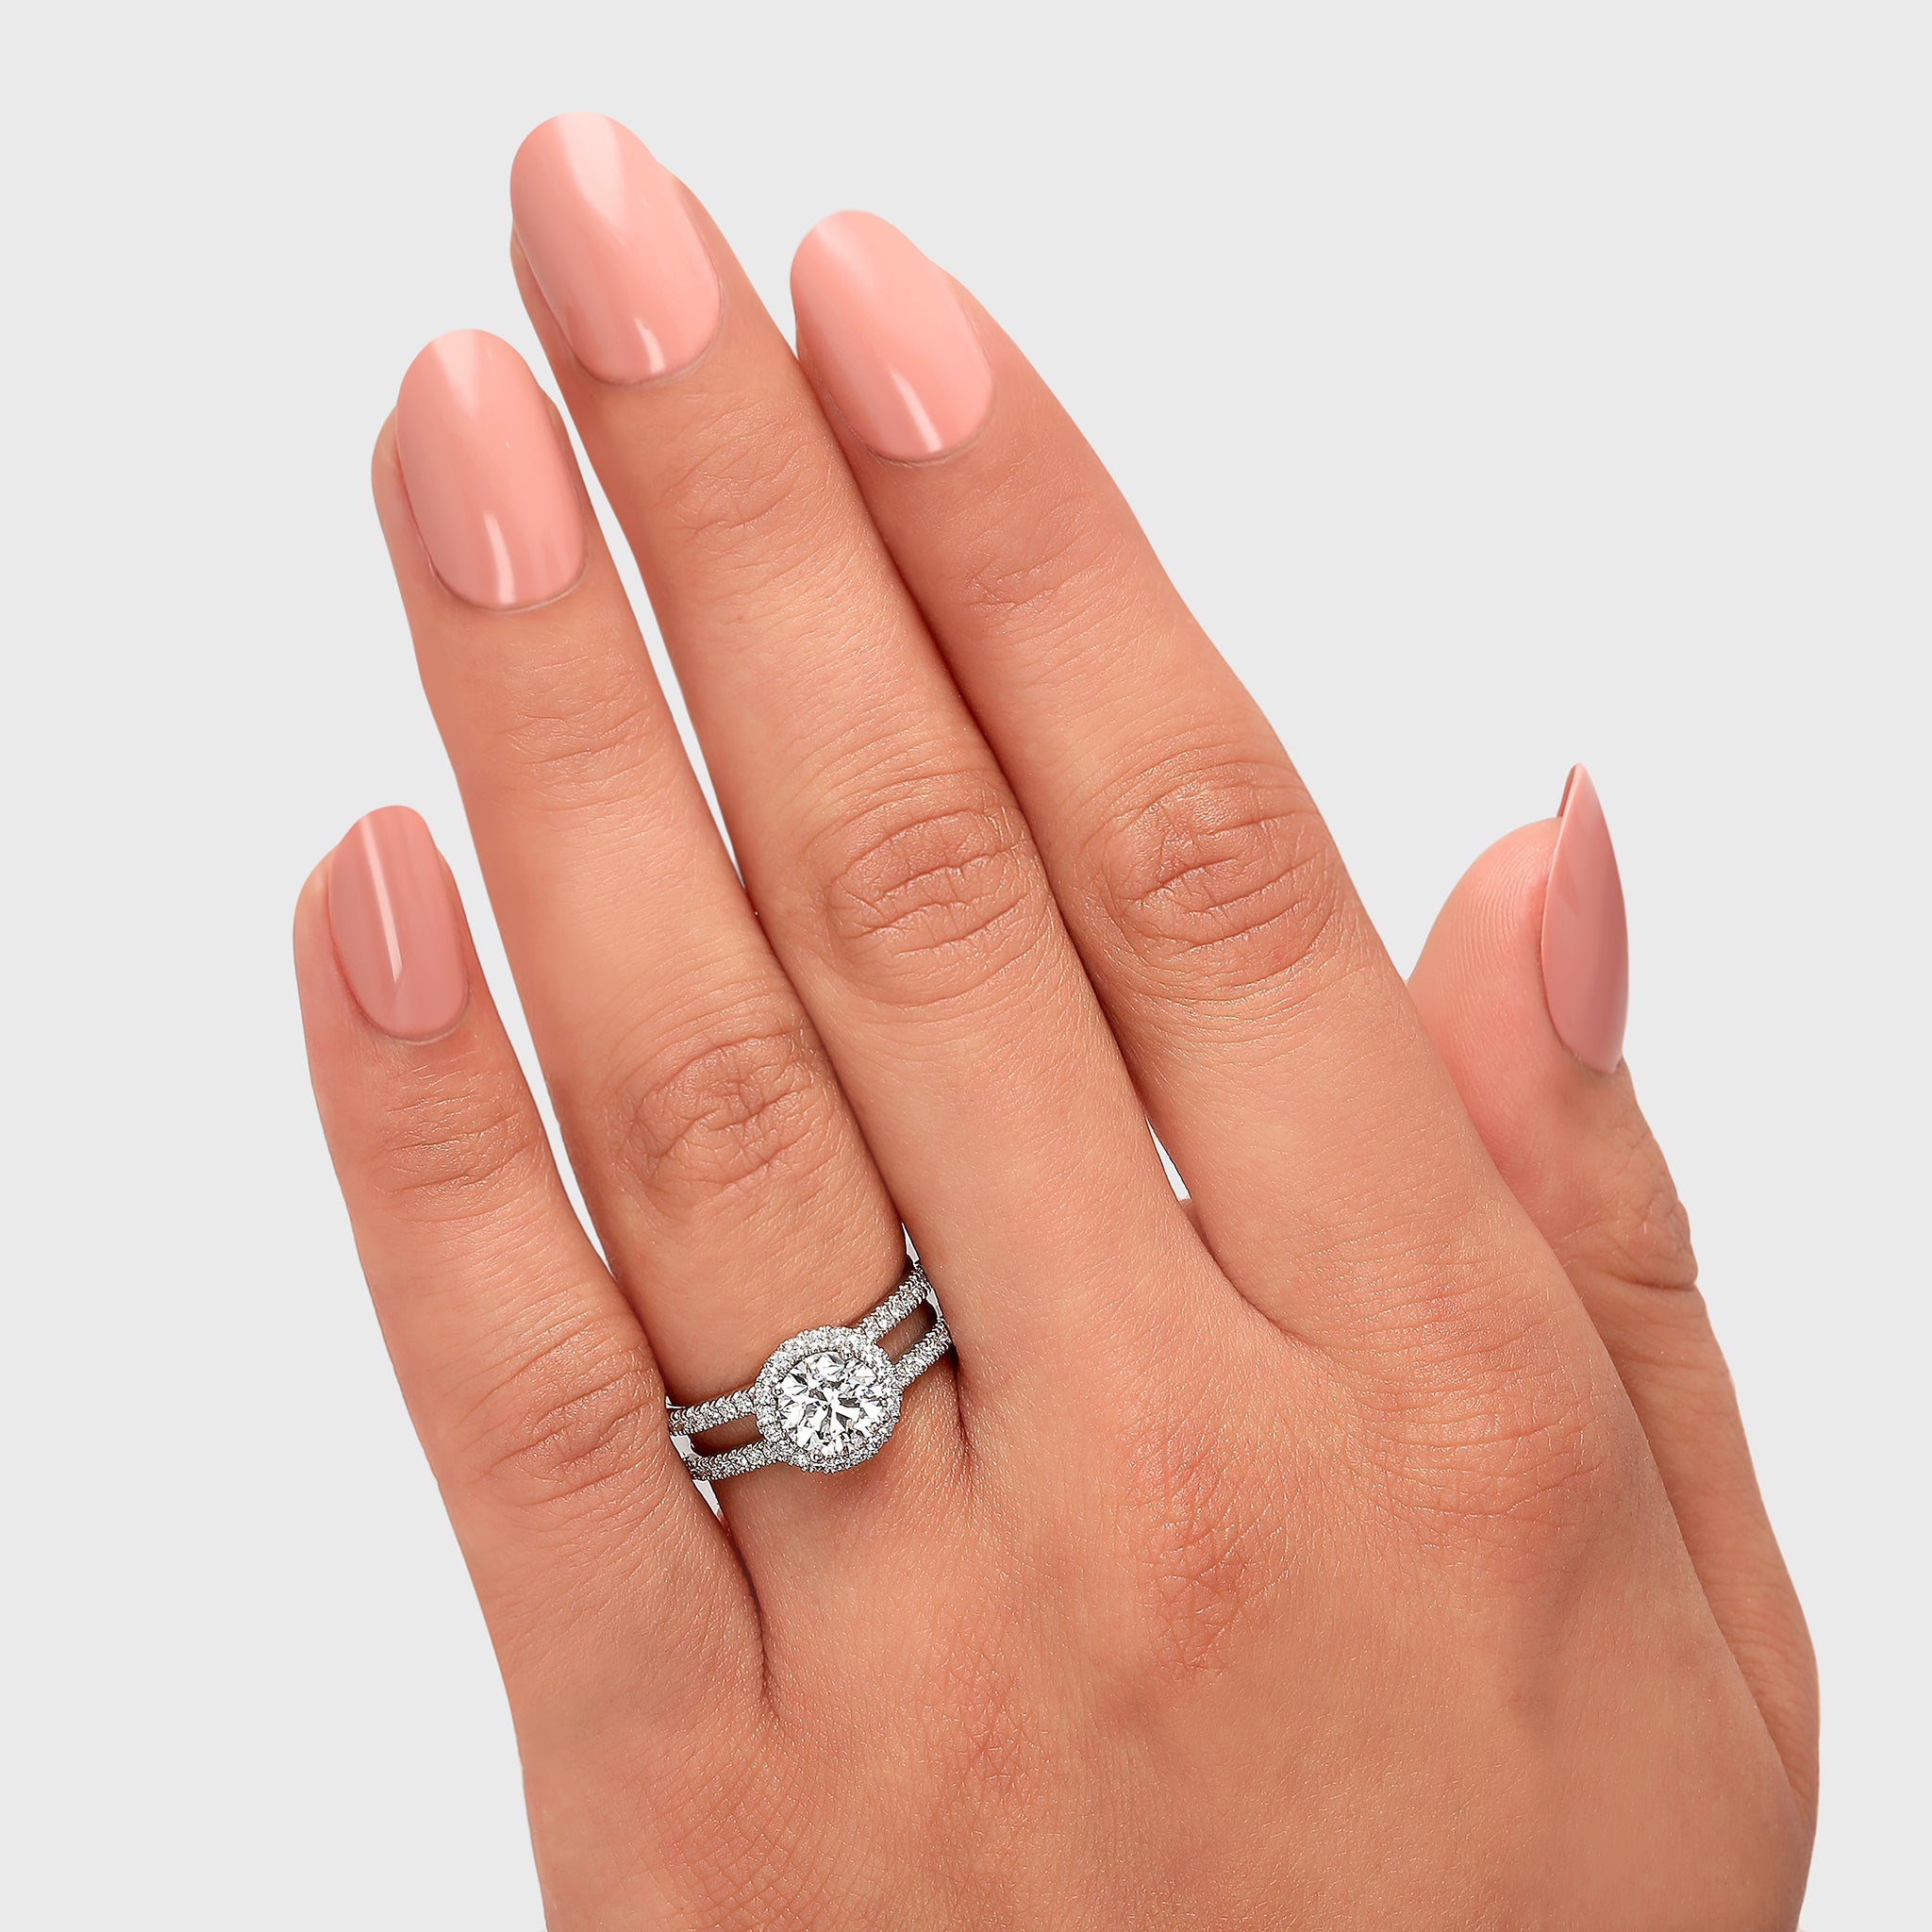 Shimansky - Women Wearing the Diamond Microset Double Band Halo Ring 1.00ct crafted in 18K White Gold